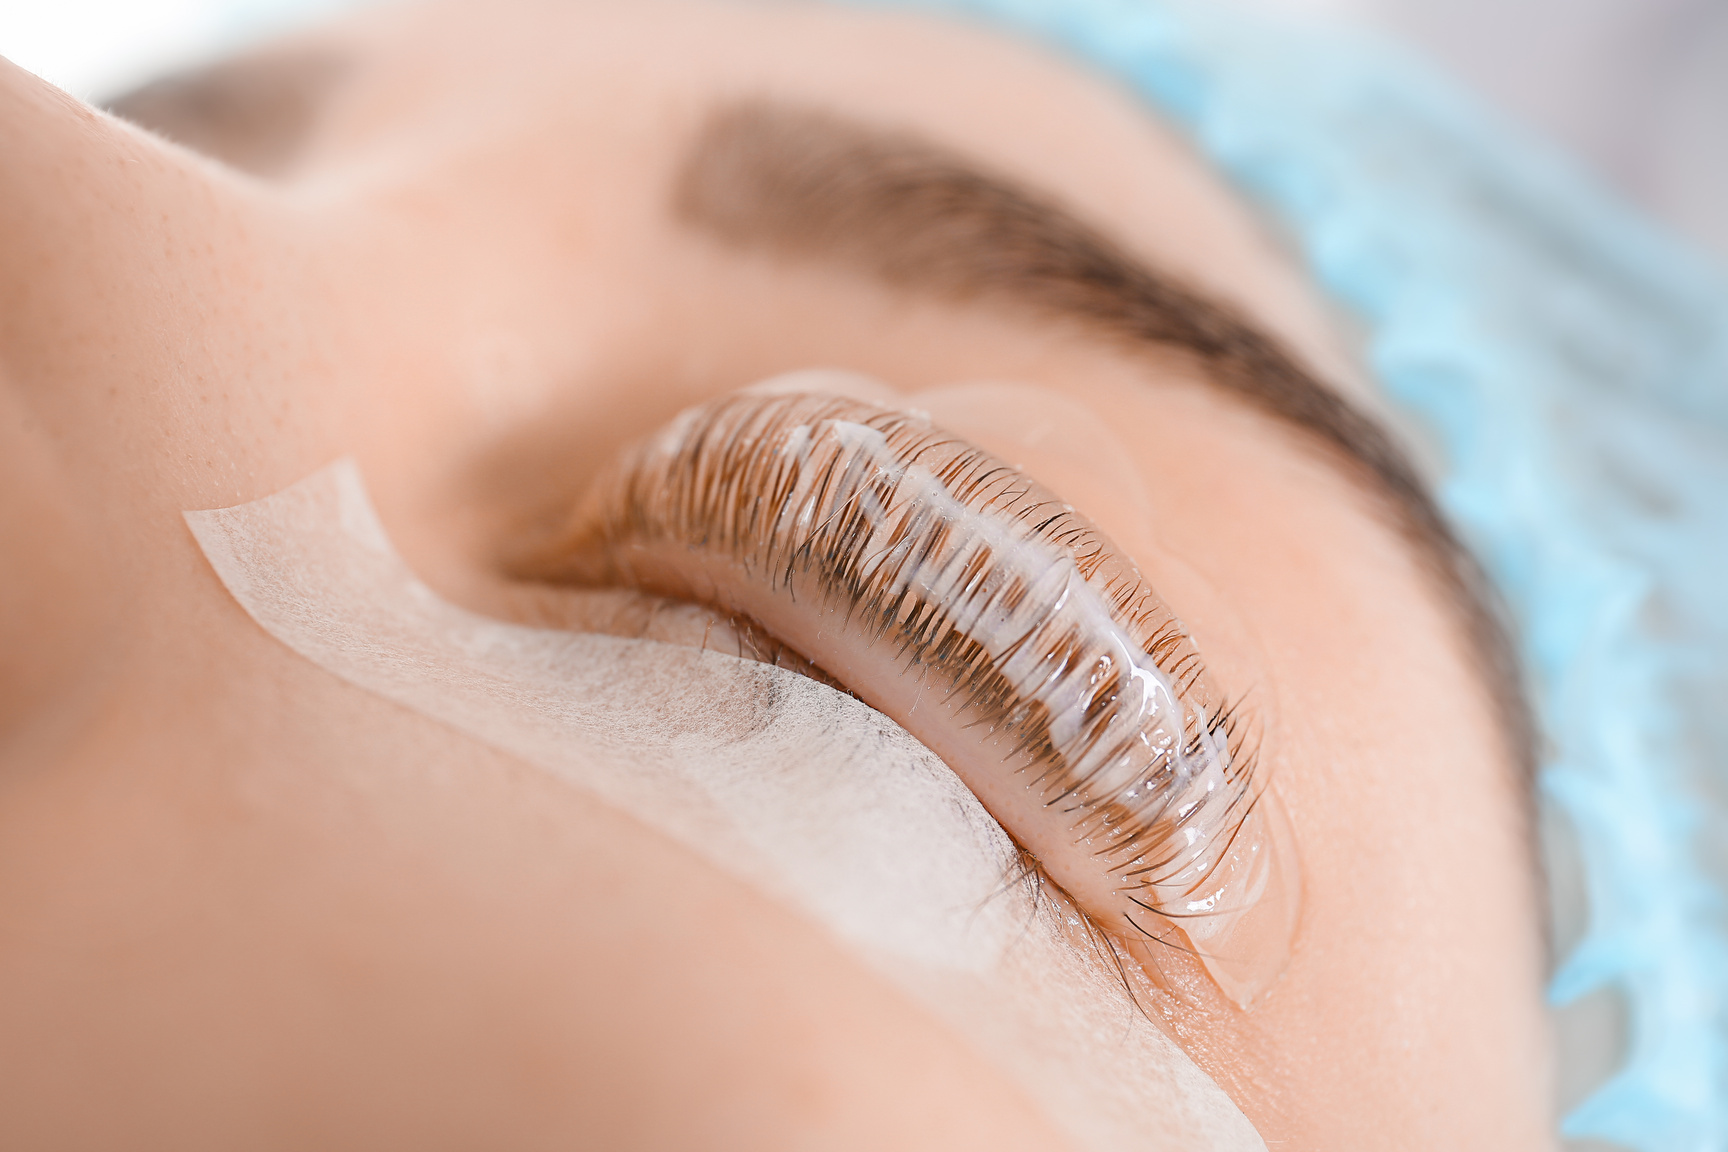 Young Woman Undergoing Procedure of Eyelashes Lamination in Beauty Salon, Closeup